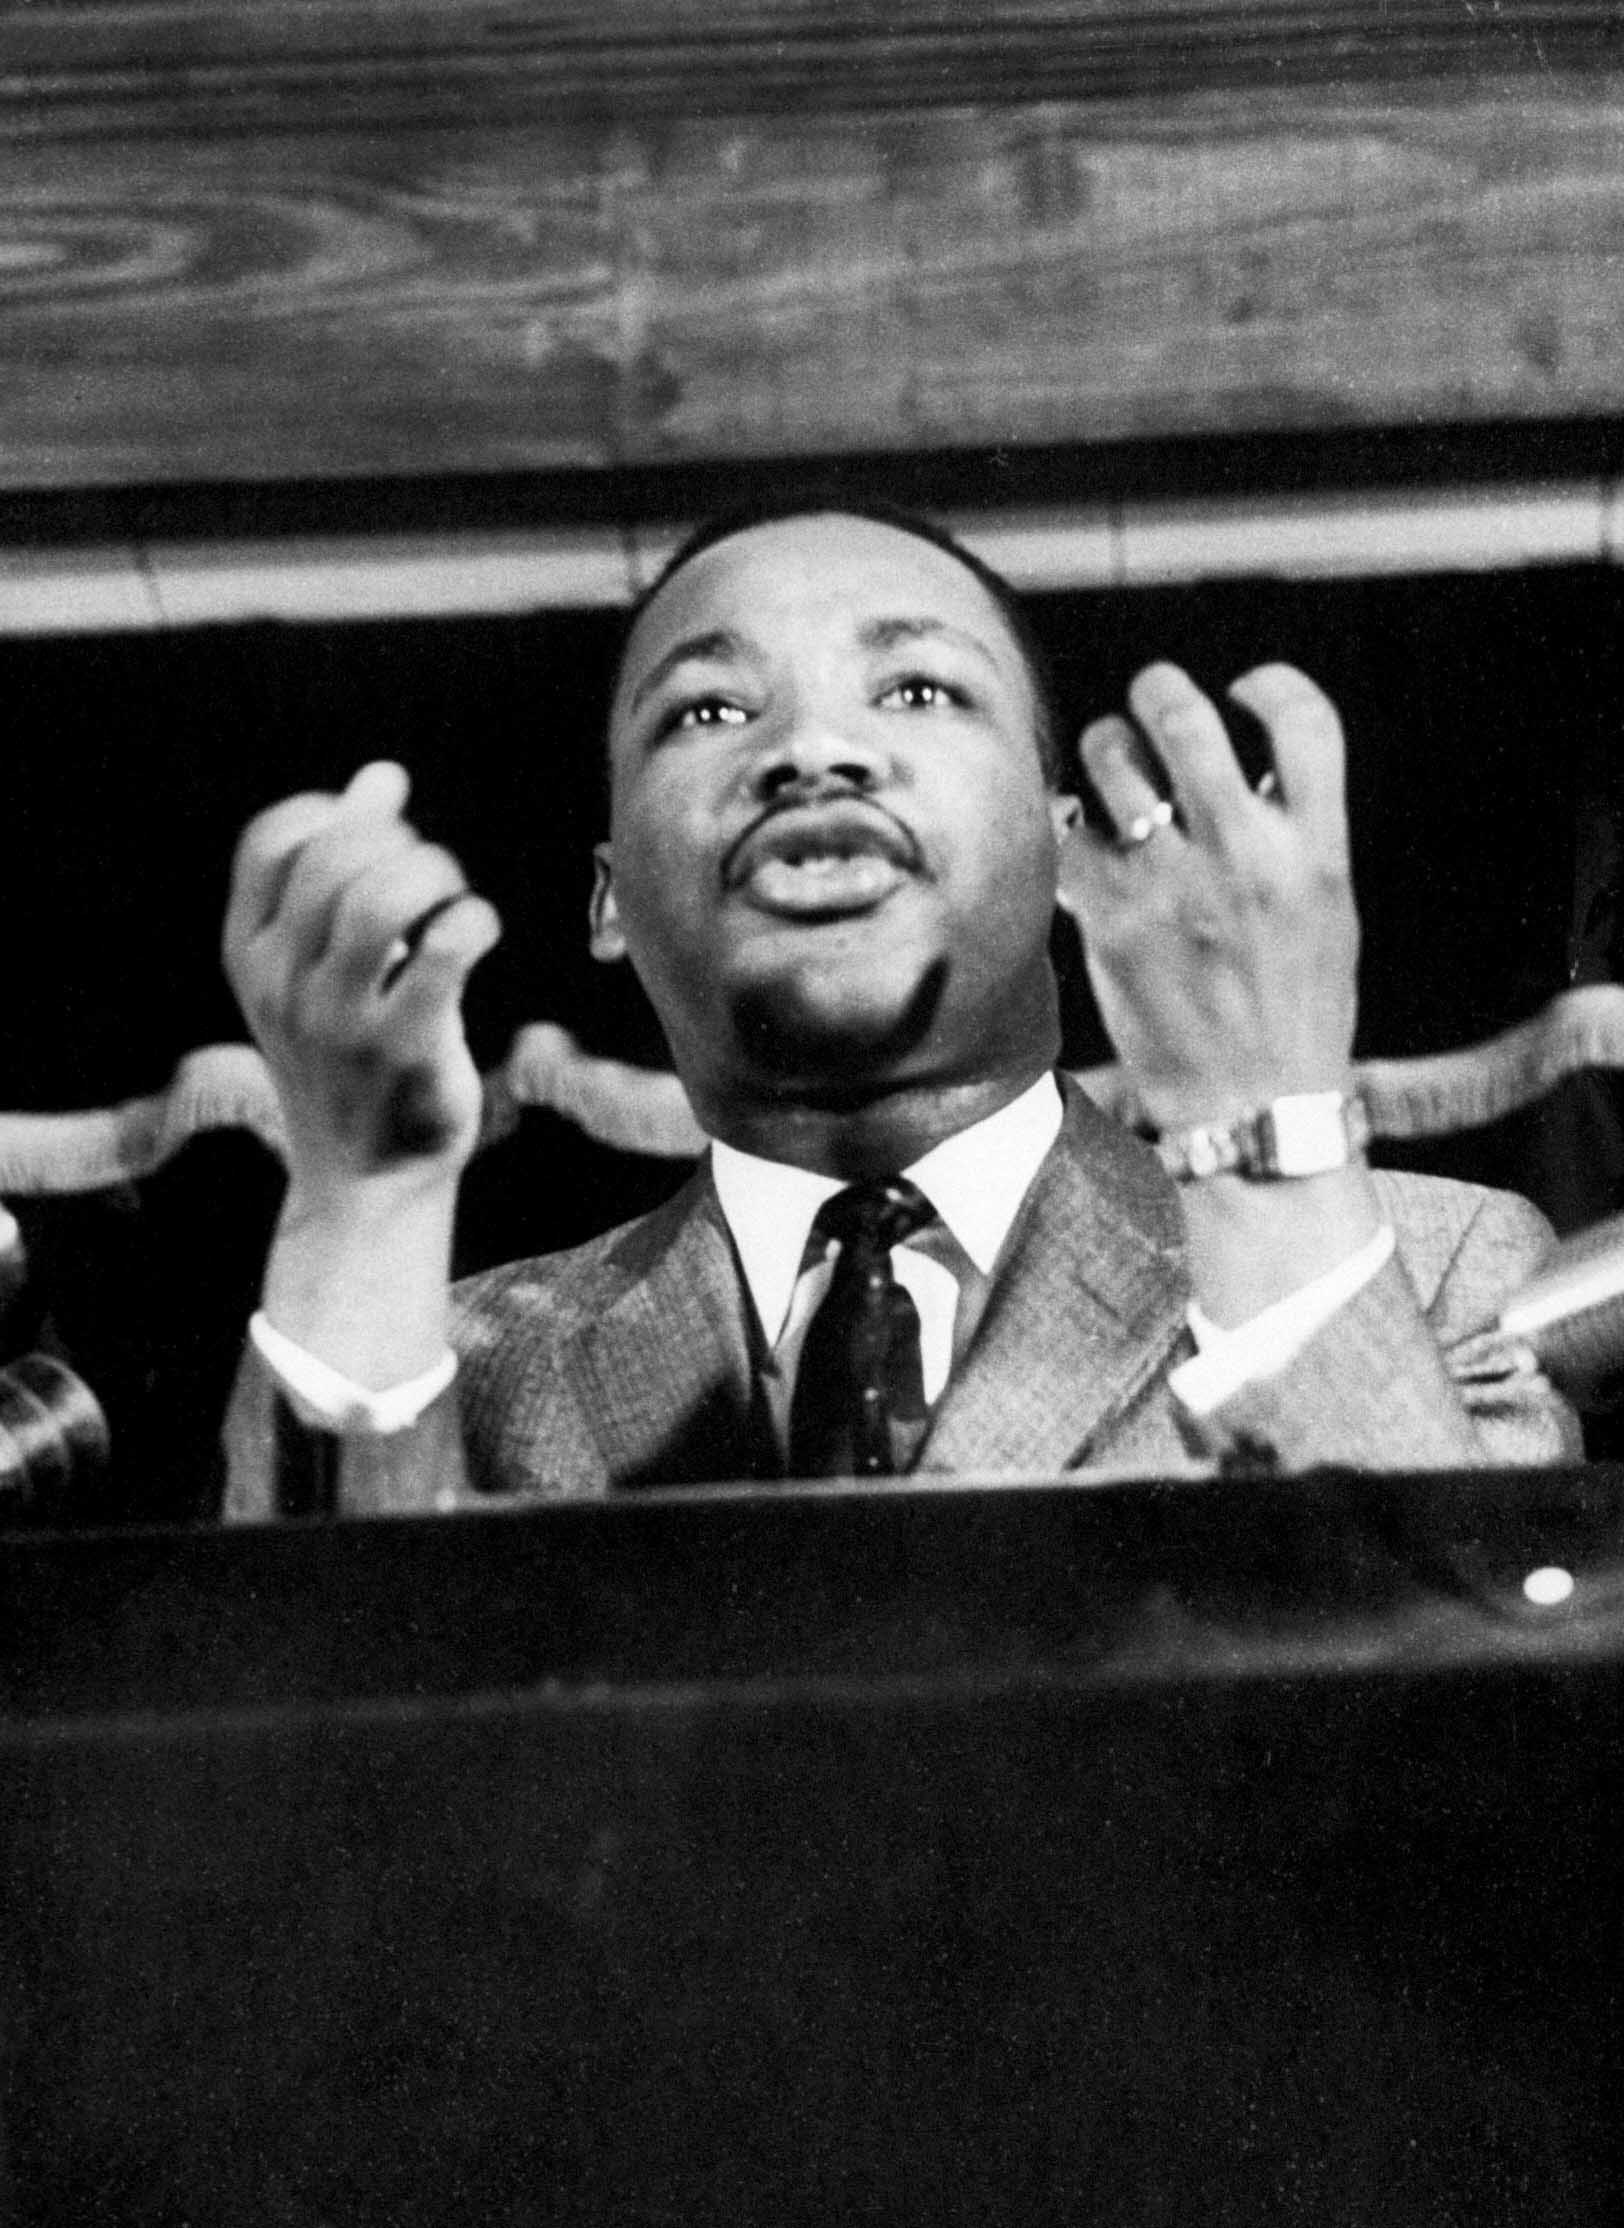 Civil rights leader Rev. Martin Luther King speaking from pulpit at mass meeting about principles of non-violence before leading assembly to ride newly integrated busses after successful boycott.